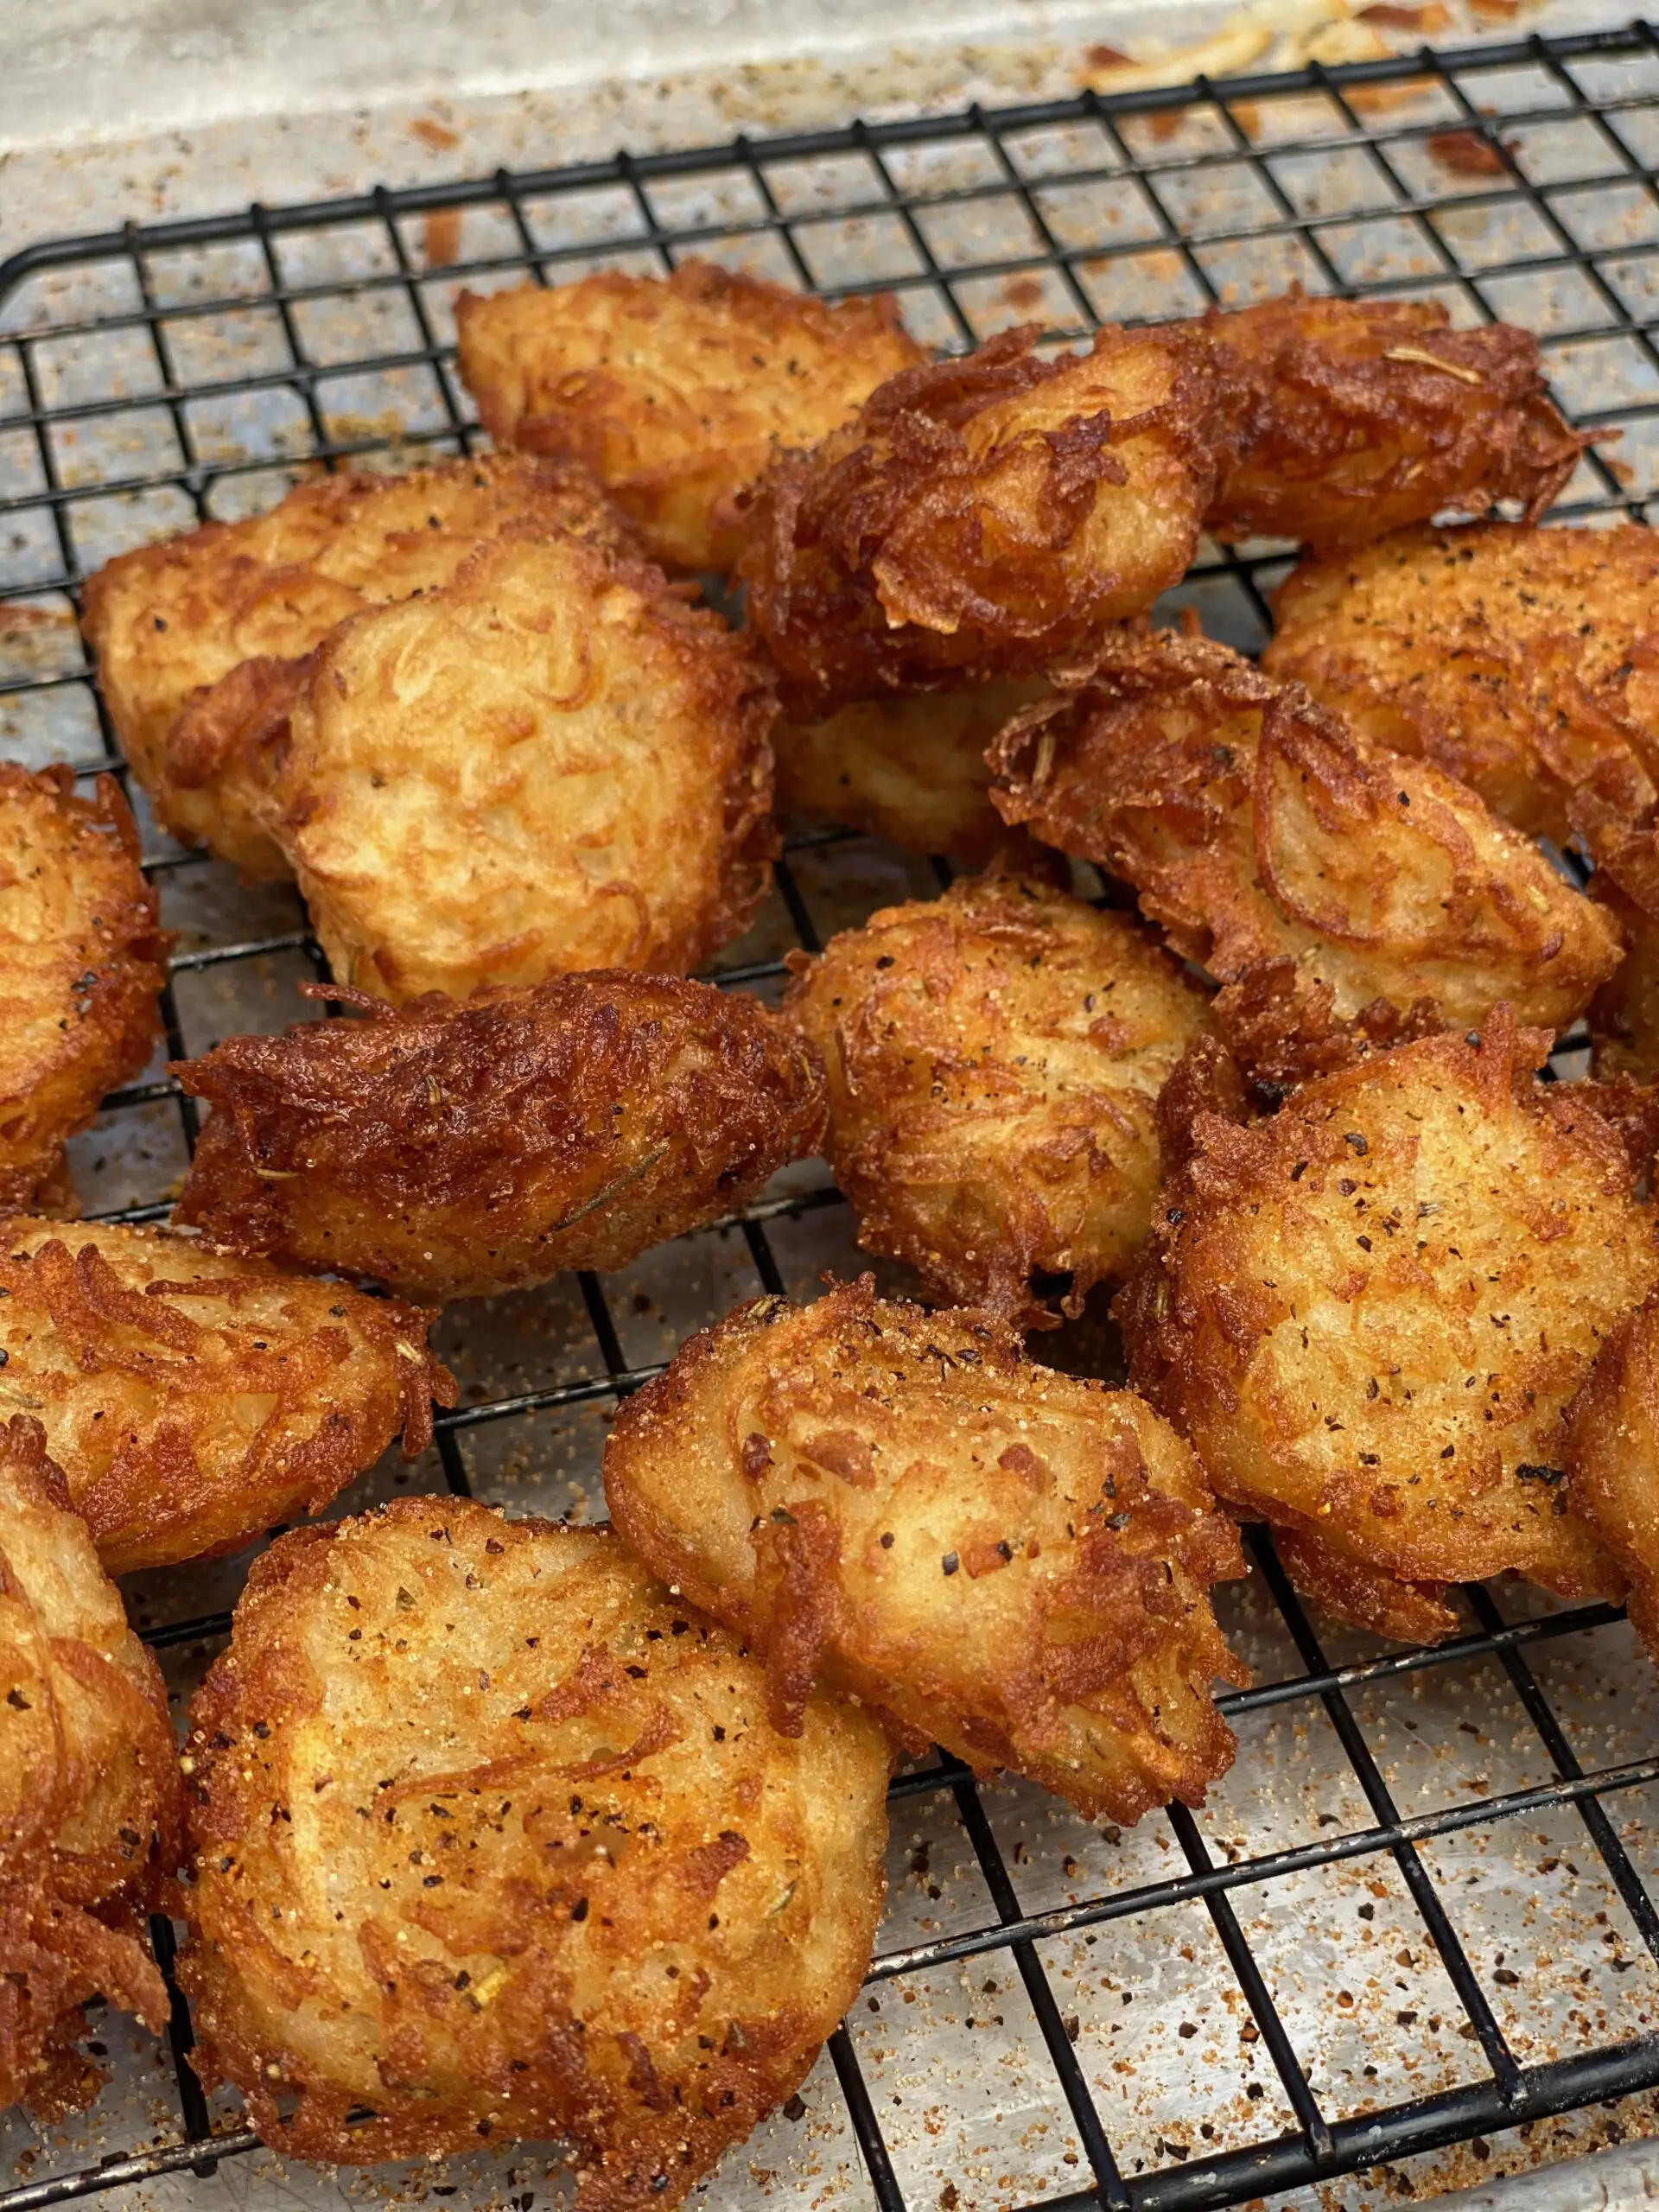 Crispy Tater Tots from Scratch - Served From Scratch